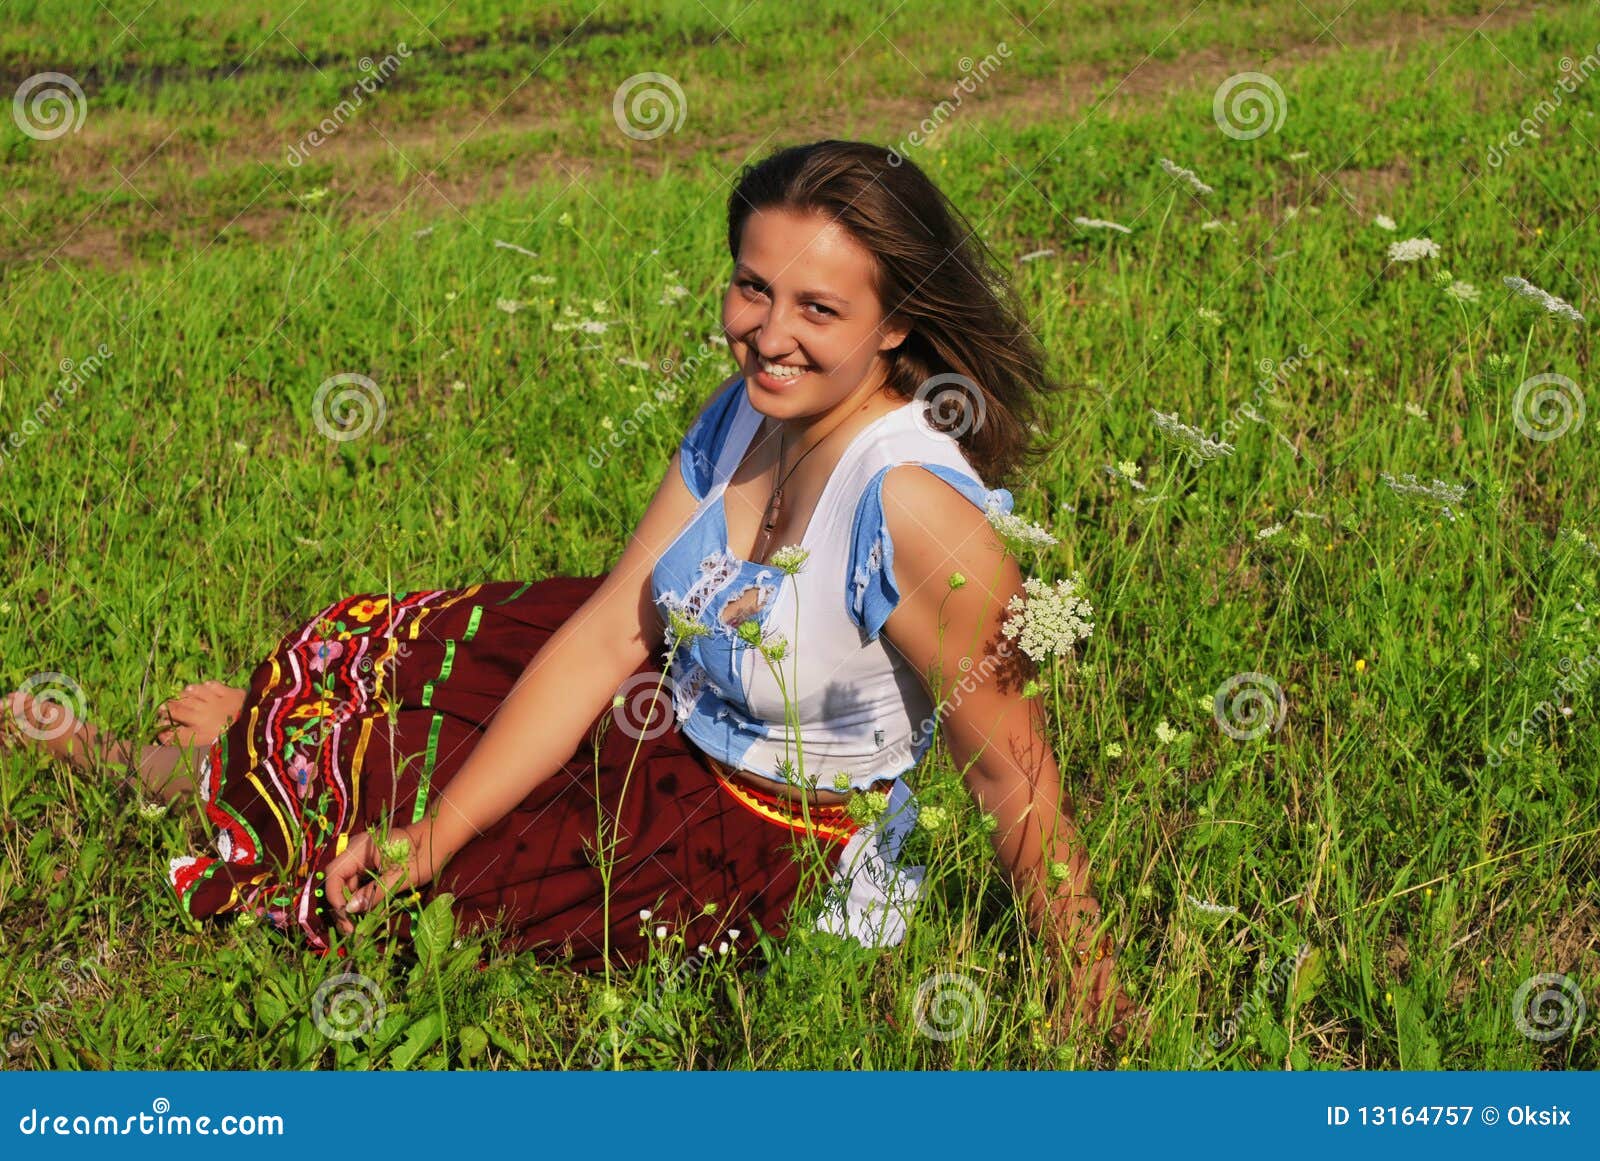 Girl in field stock image. Image of meadow, adult, leisure - 13164757